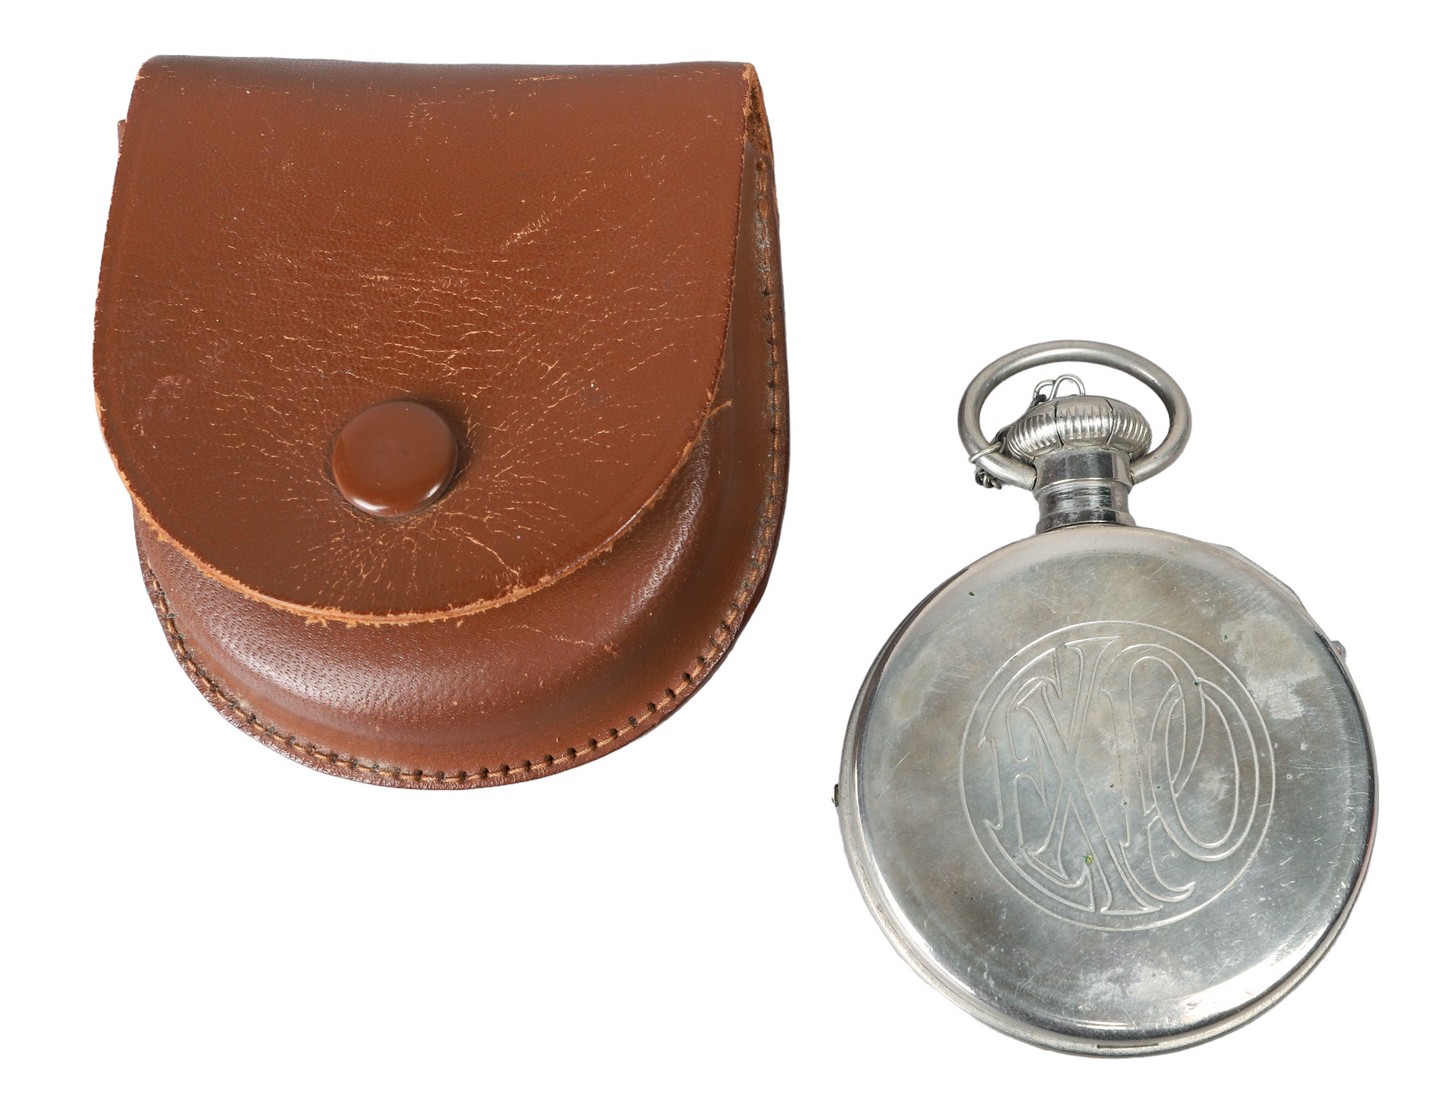 Expo Watch Camera, pocket watch form